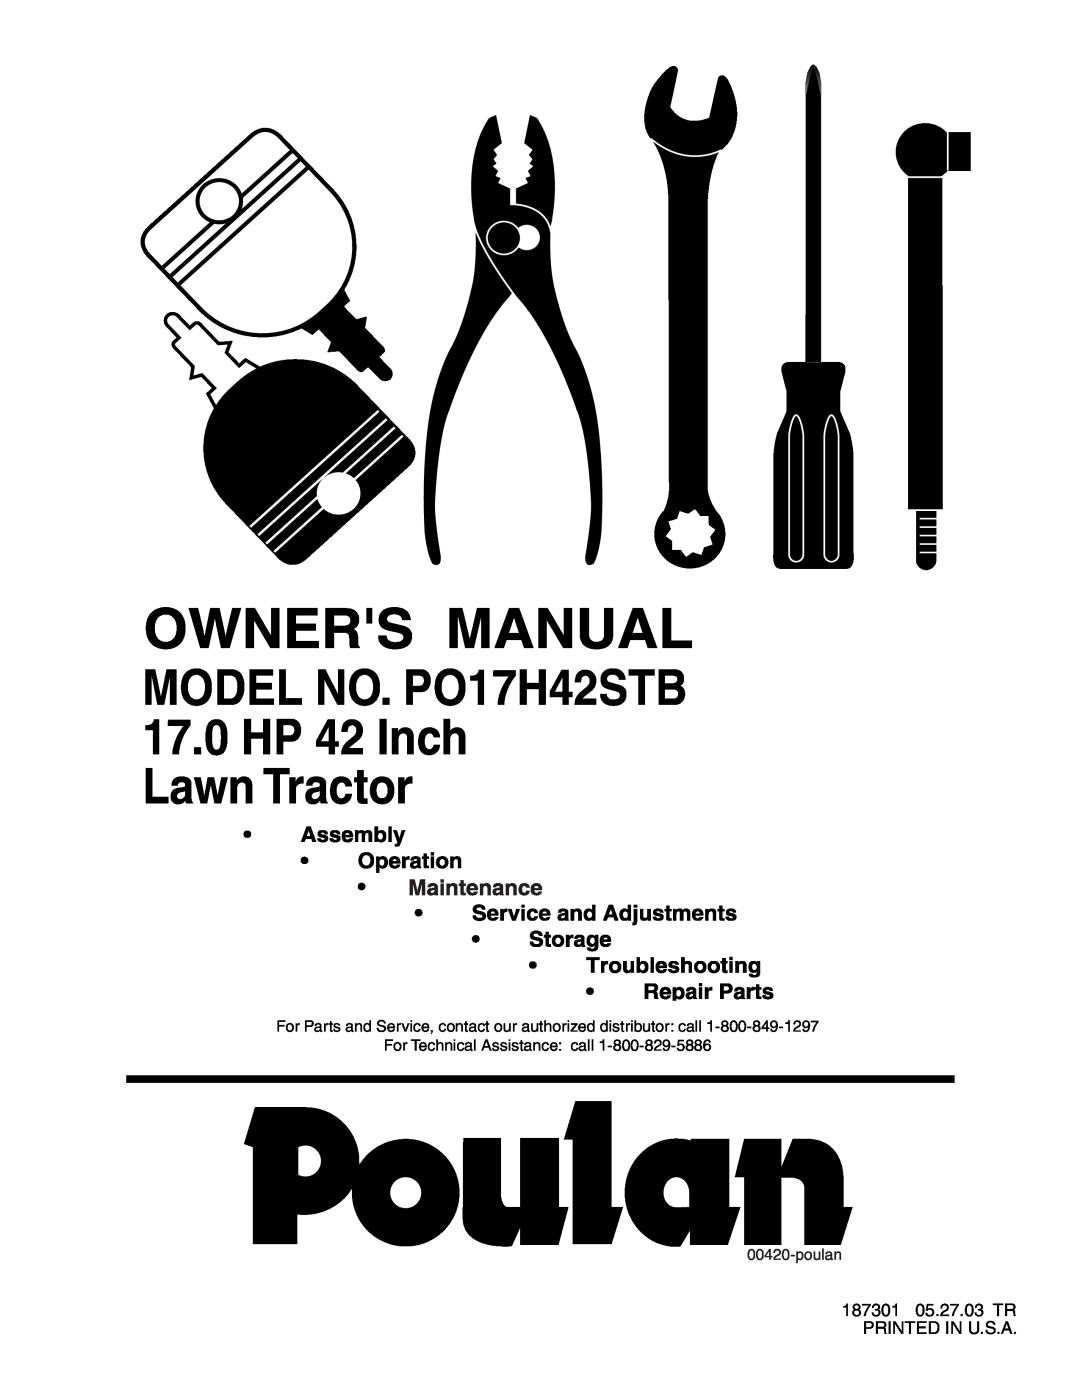 Poulan manual MODEL NO. PO17H42STB 17.0 HP 42 Inch Lawn Tractor, 187301 05.27.03 TR PRINTED IN U.S.A, poulan 